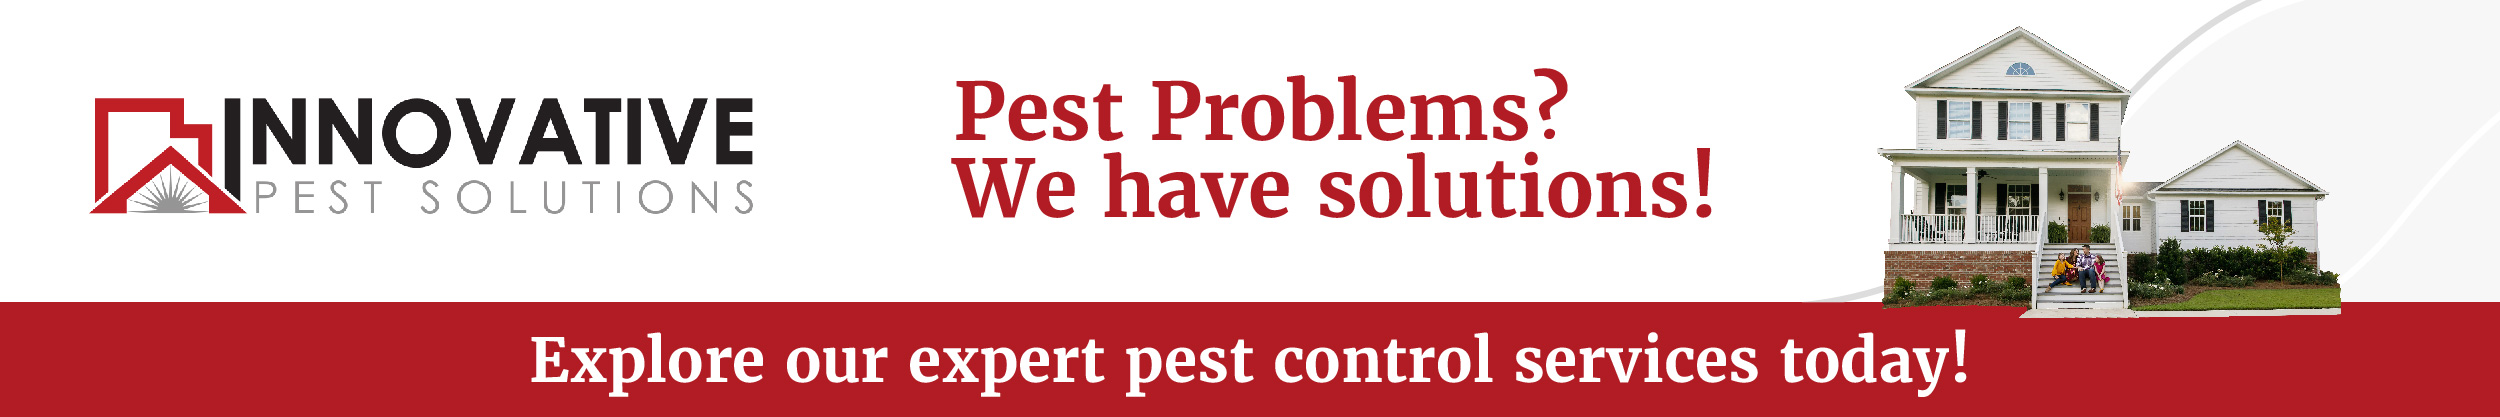 Innovative pest solutions CTA for general pest control services